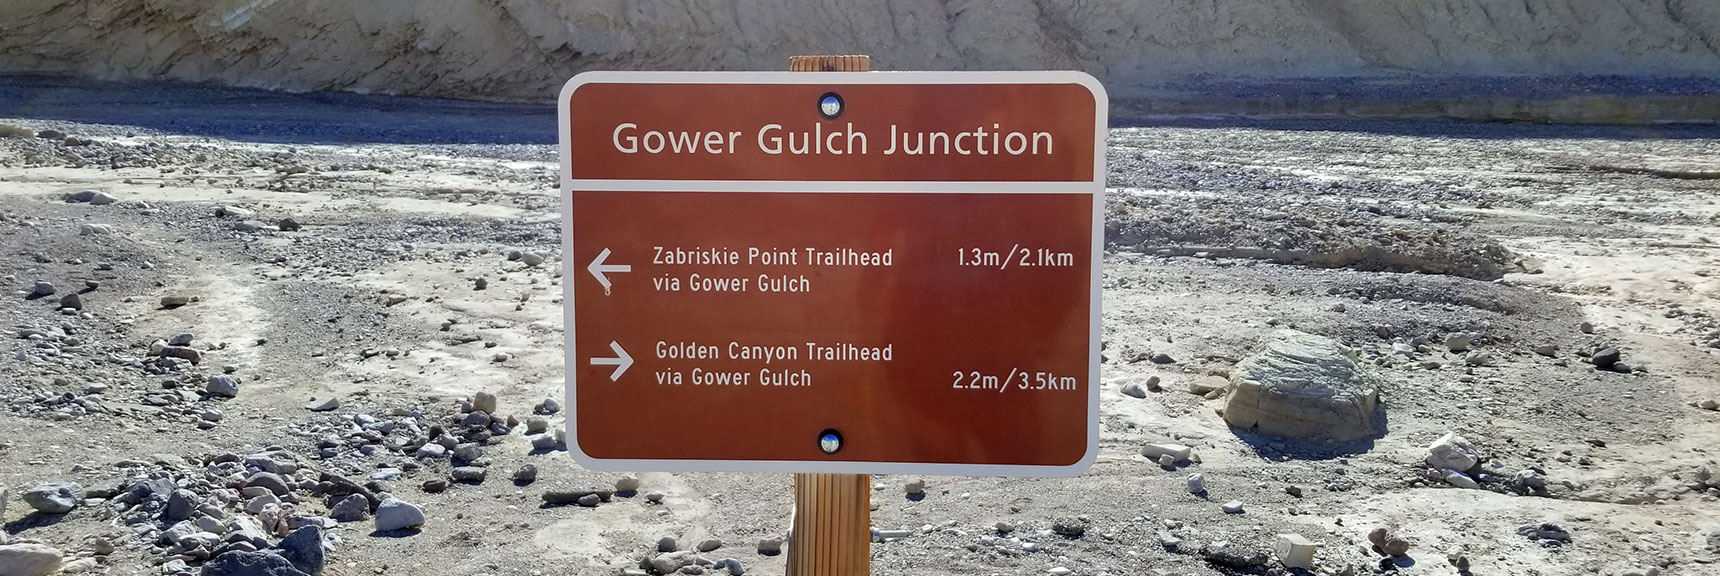 Back at Gower Gulch Junction, Heading Into Gower Gulch. | Golden Canyon to Zabriskie Point | Death Valley National Park, California